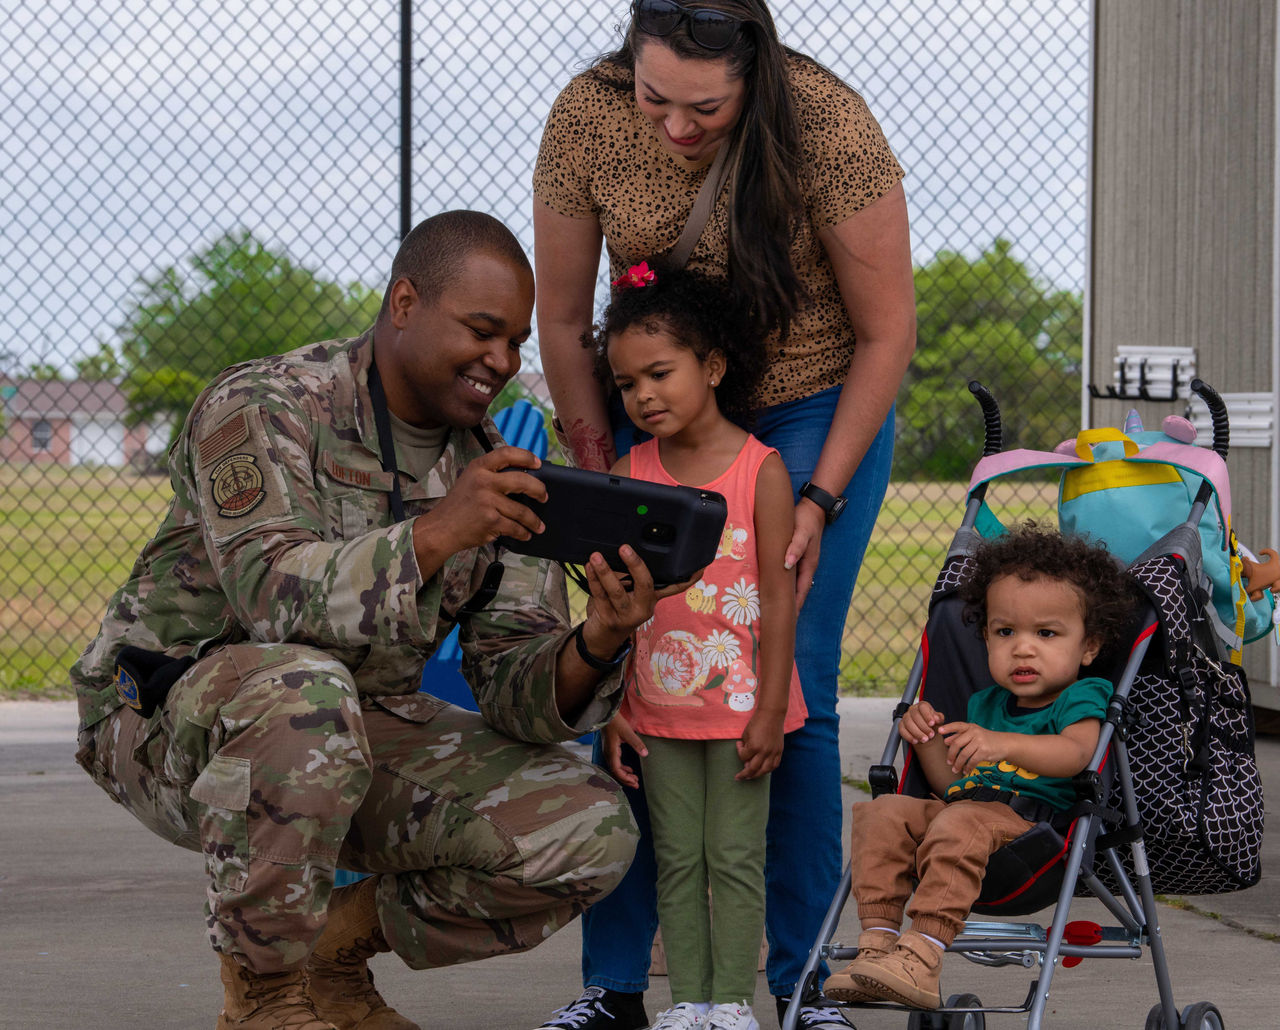 U.S. Air Force Tech. Sgt. Billy Lofton, 325th Security Forces Squadron, and his family. (U.S. Air Force photo by Airman 1st Class Zachary Nordheim)